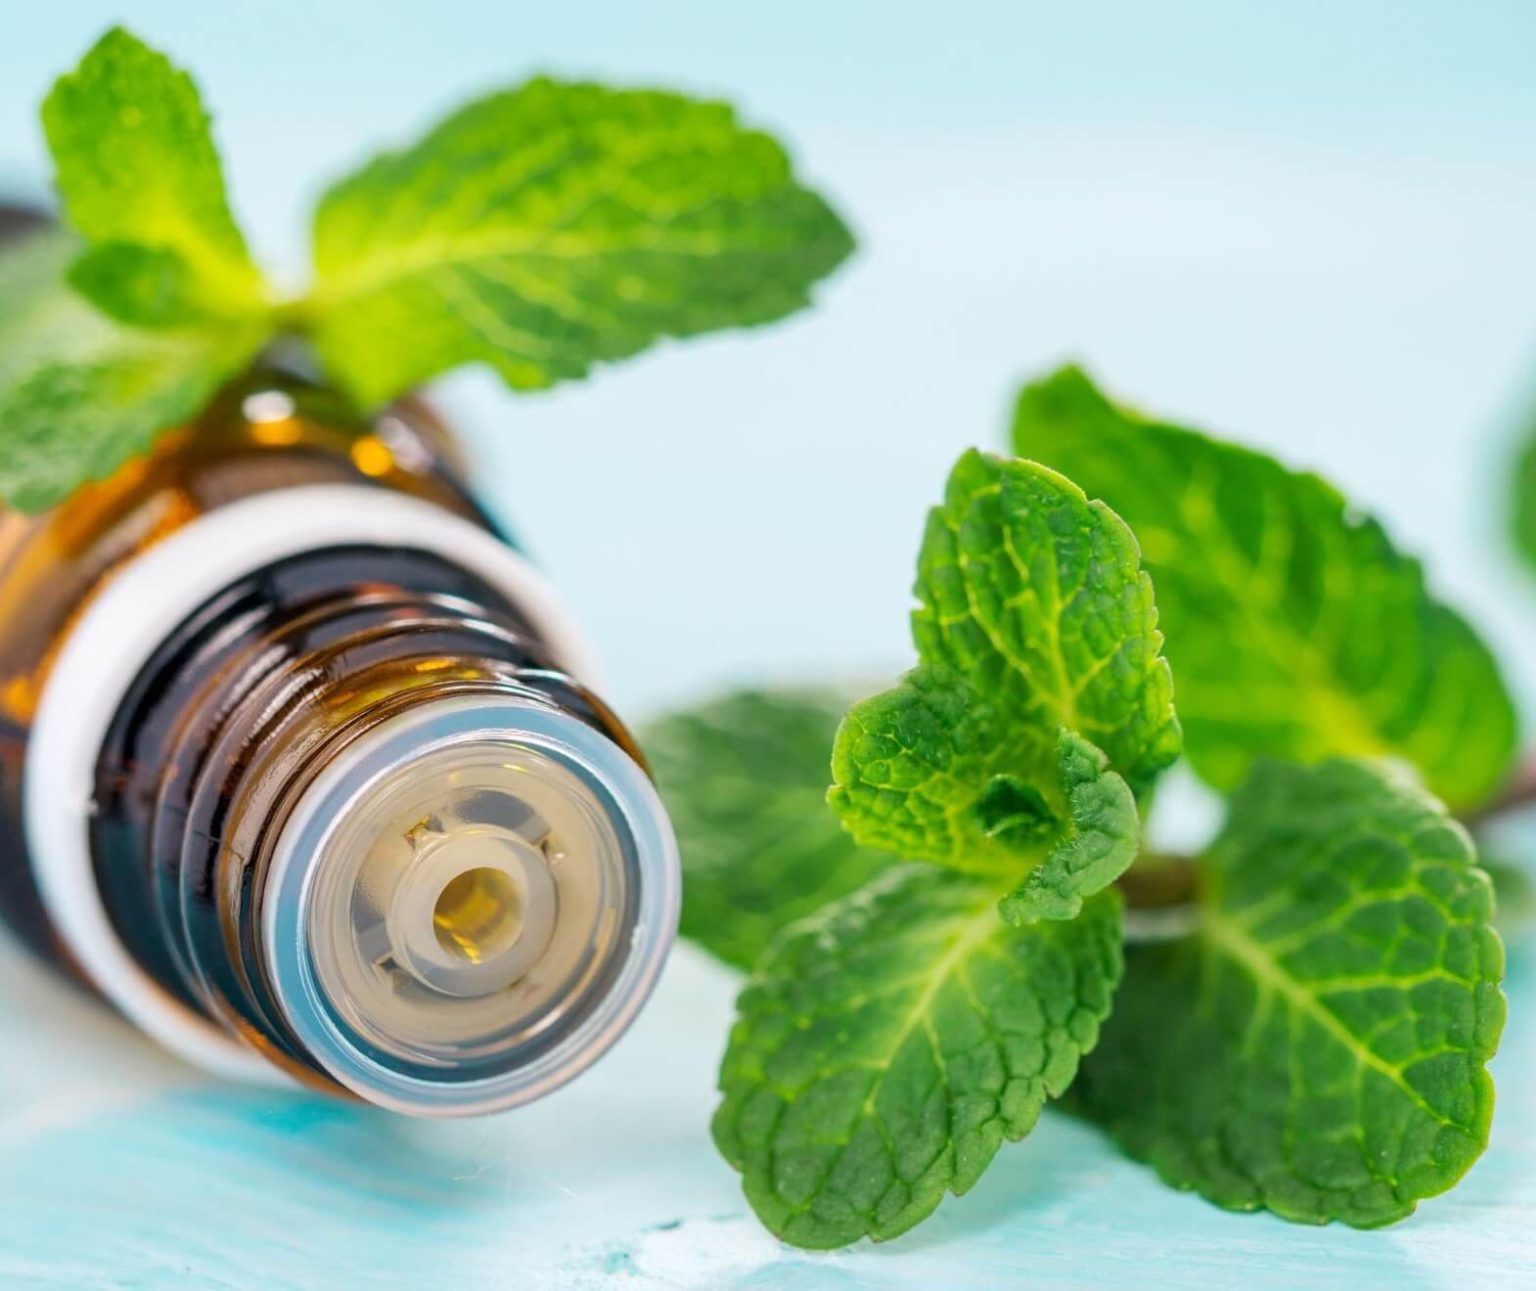 peppermint oil for toothache featured